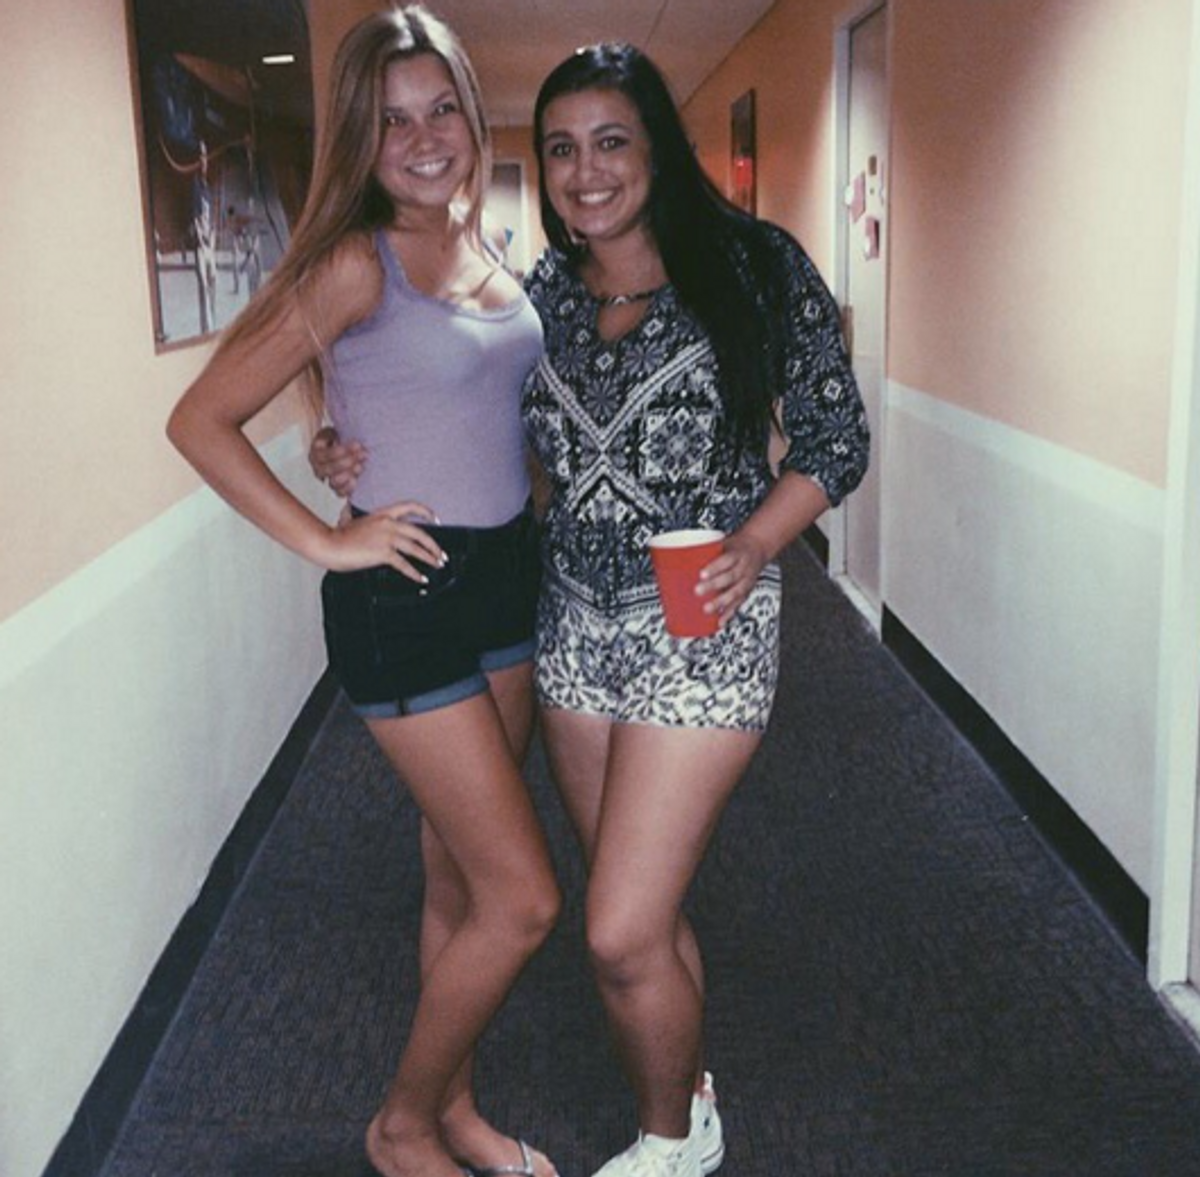 12 Signs You've Met Your College BFF